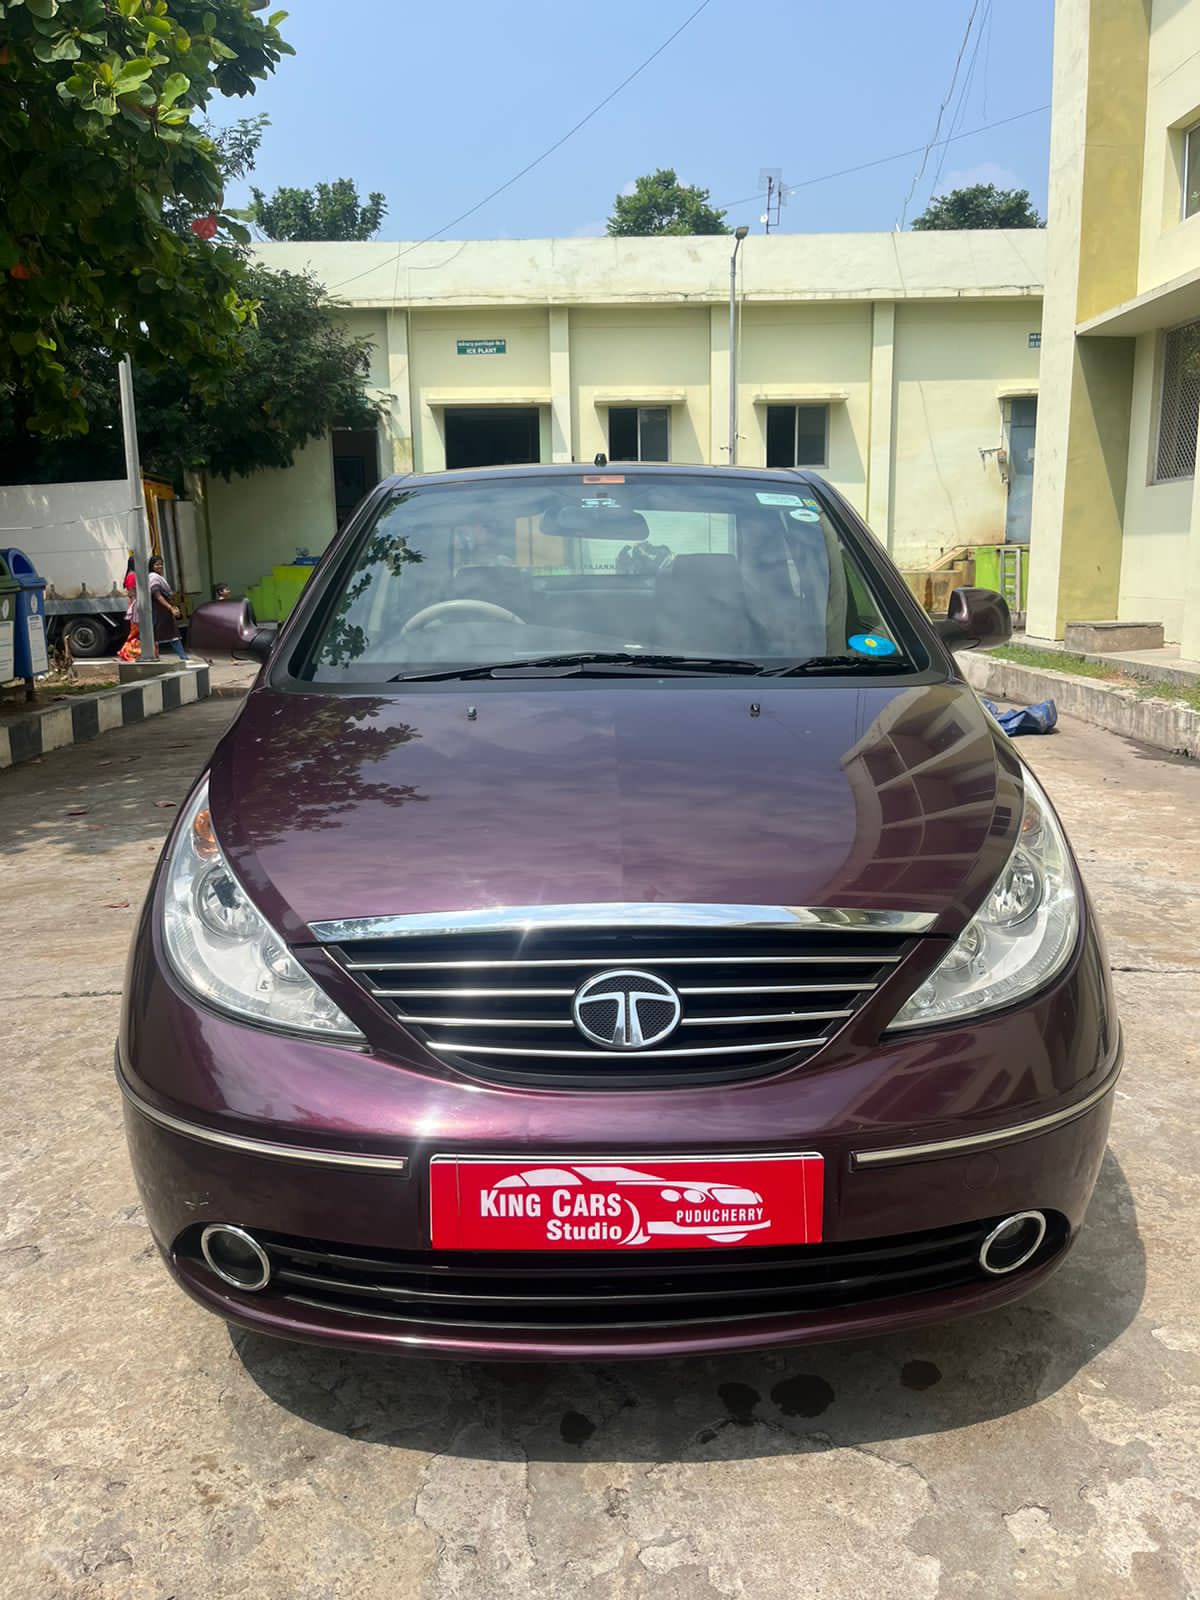 4793-for-sale-Tata-Motors-Manza-Diesel-First-Owner-2011-PY-registered-rs-264999